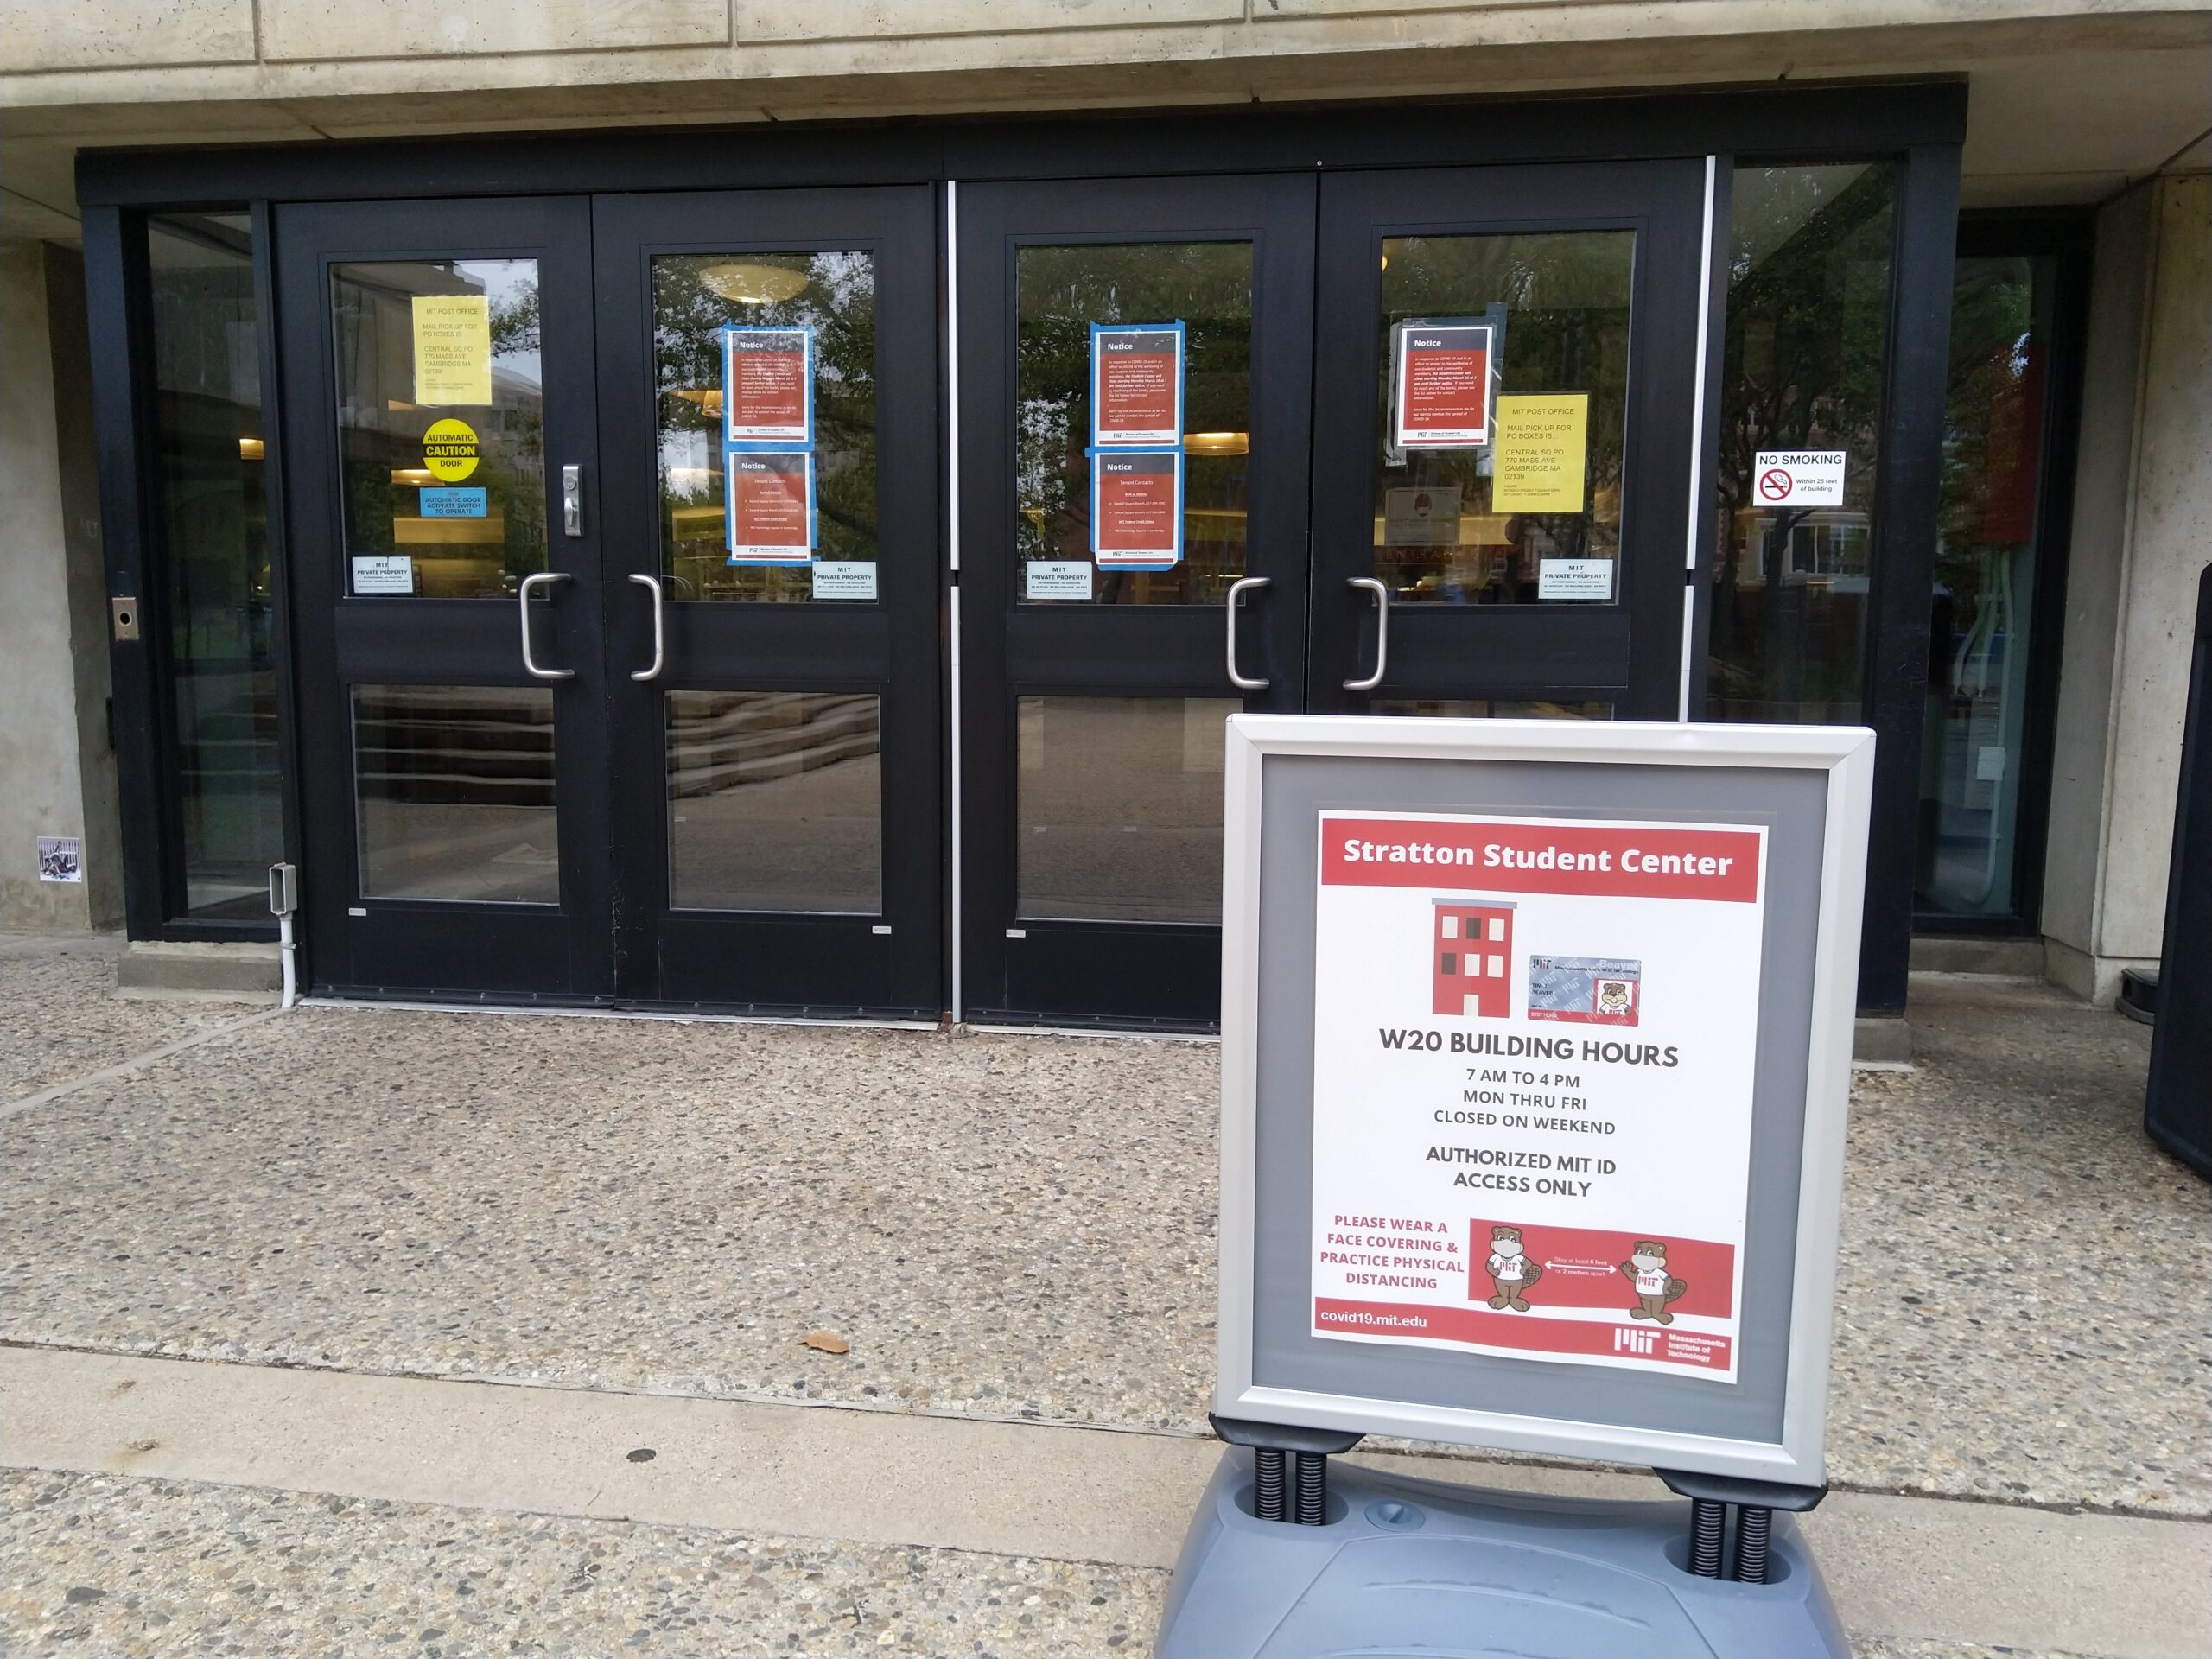 the doors of the student center with red sheets of paper taped to the doors. a sign in front has text including "AUTHORIZED MIT ID ACCESS ONLY"